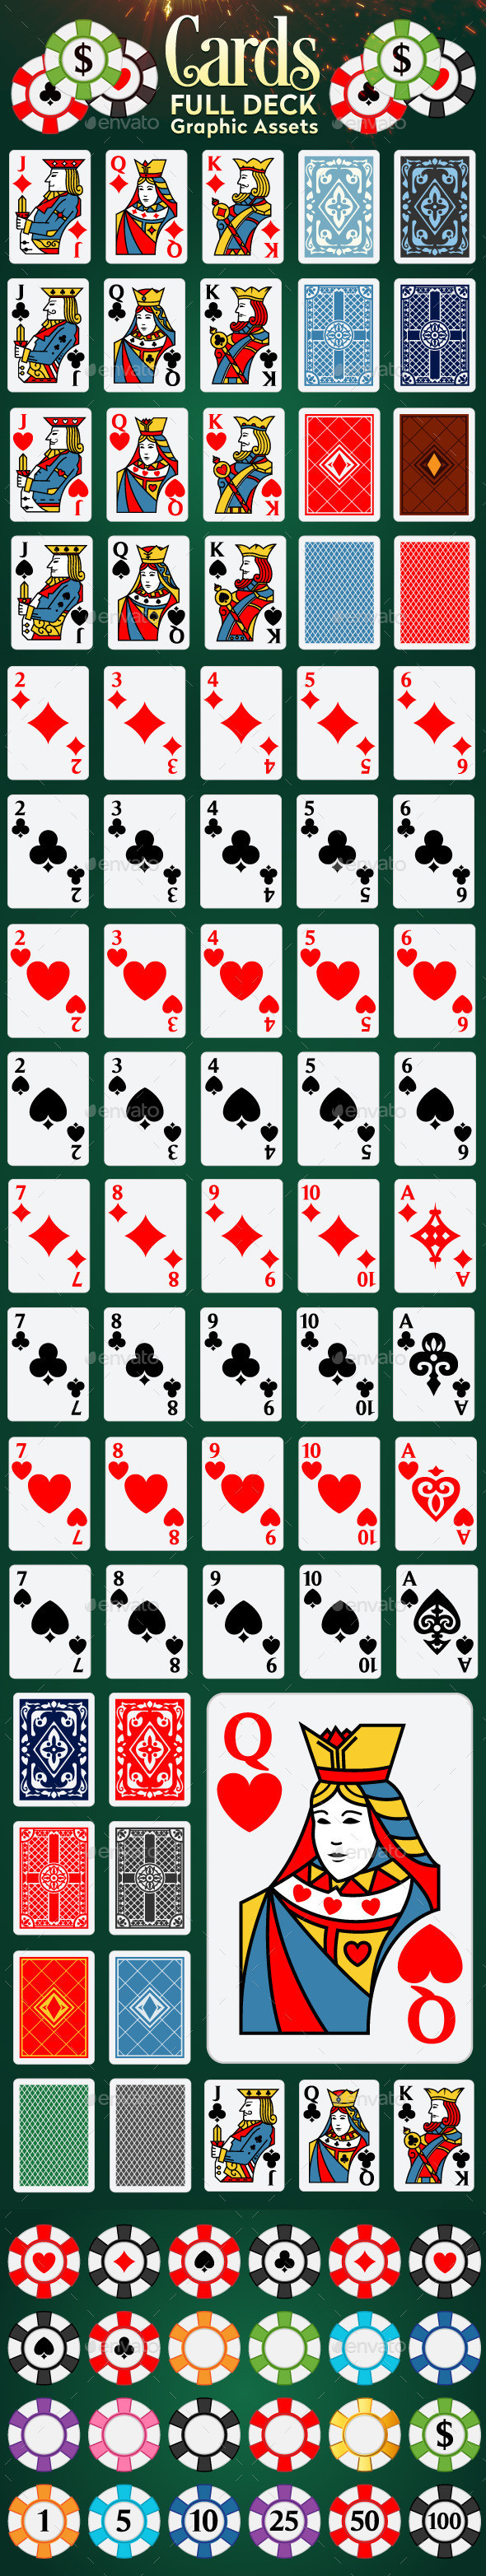 Full deck of playing cards preview